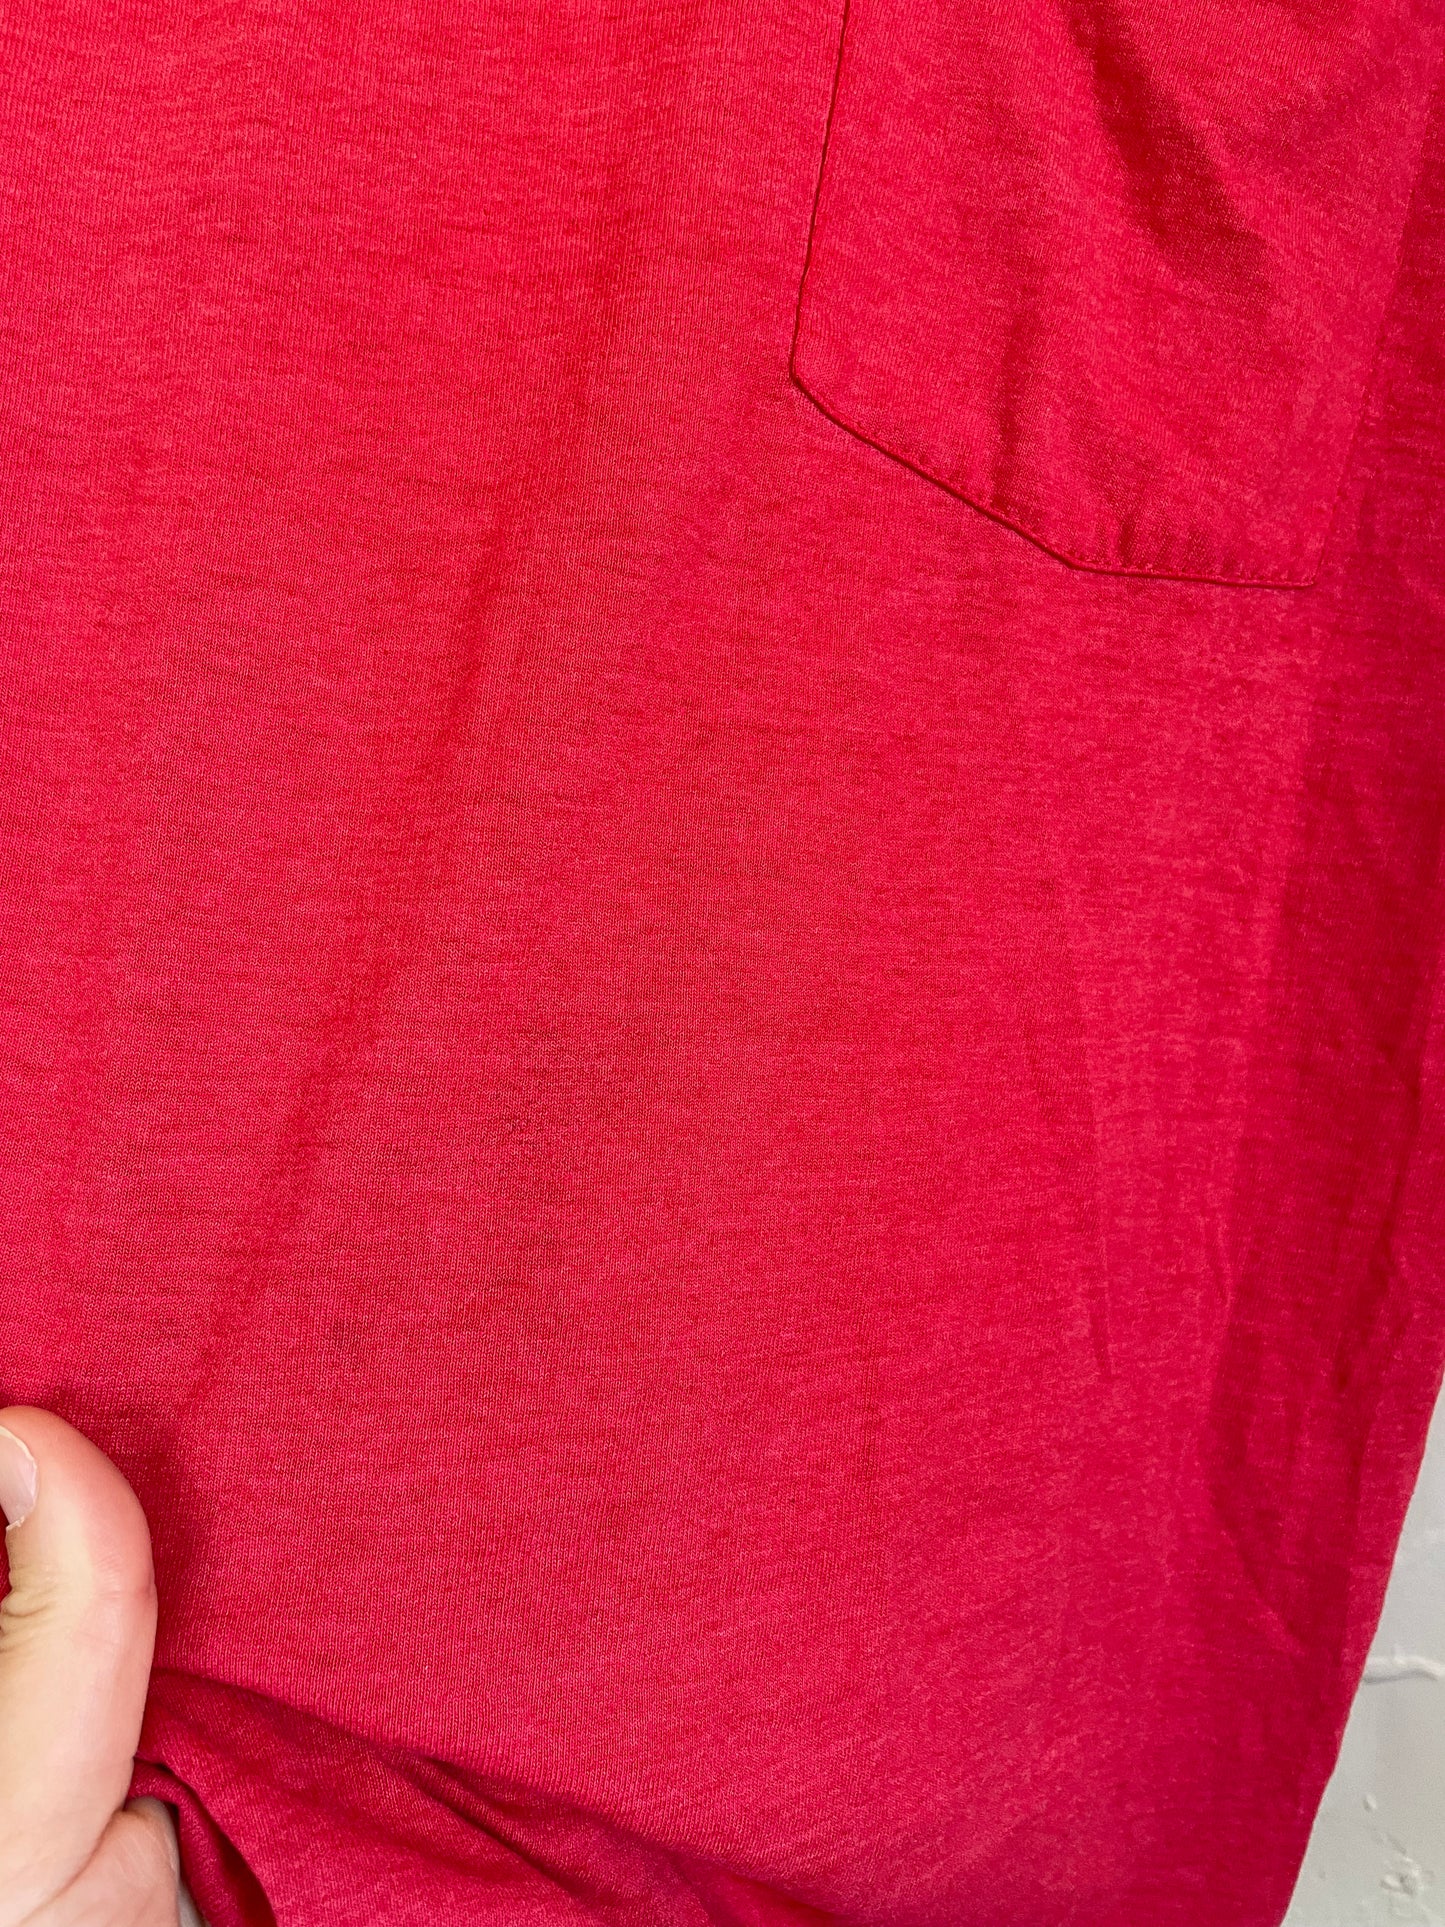 80s Blank Faded Red Pocket Tee